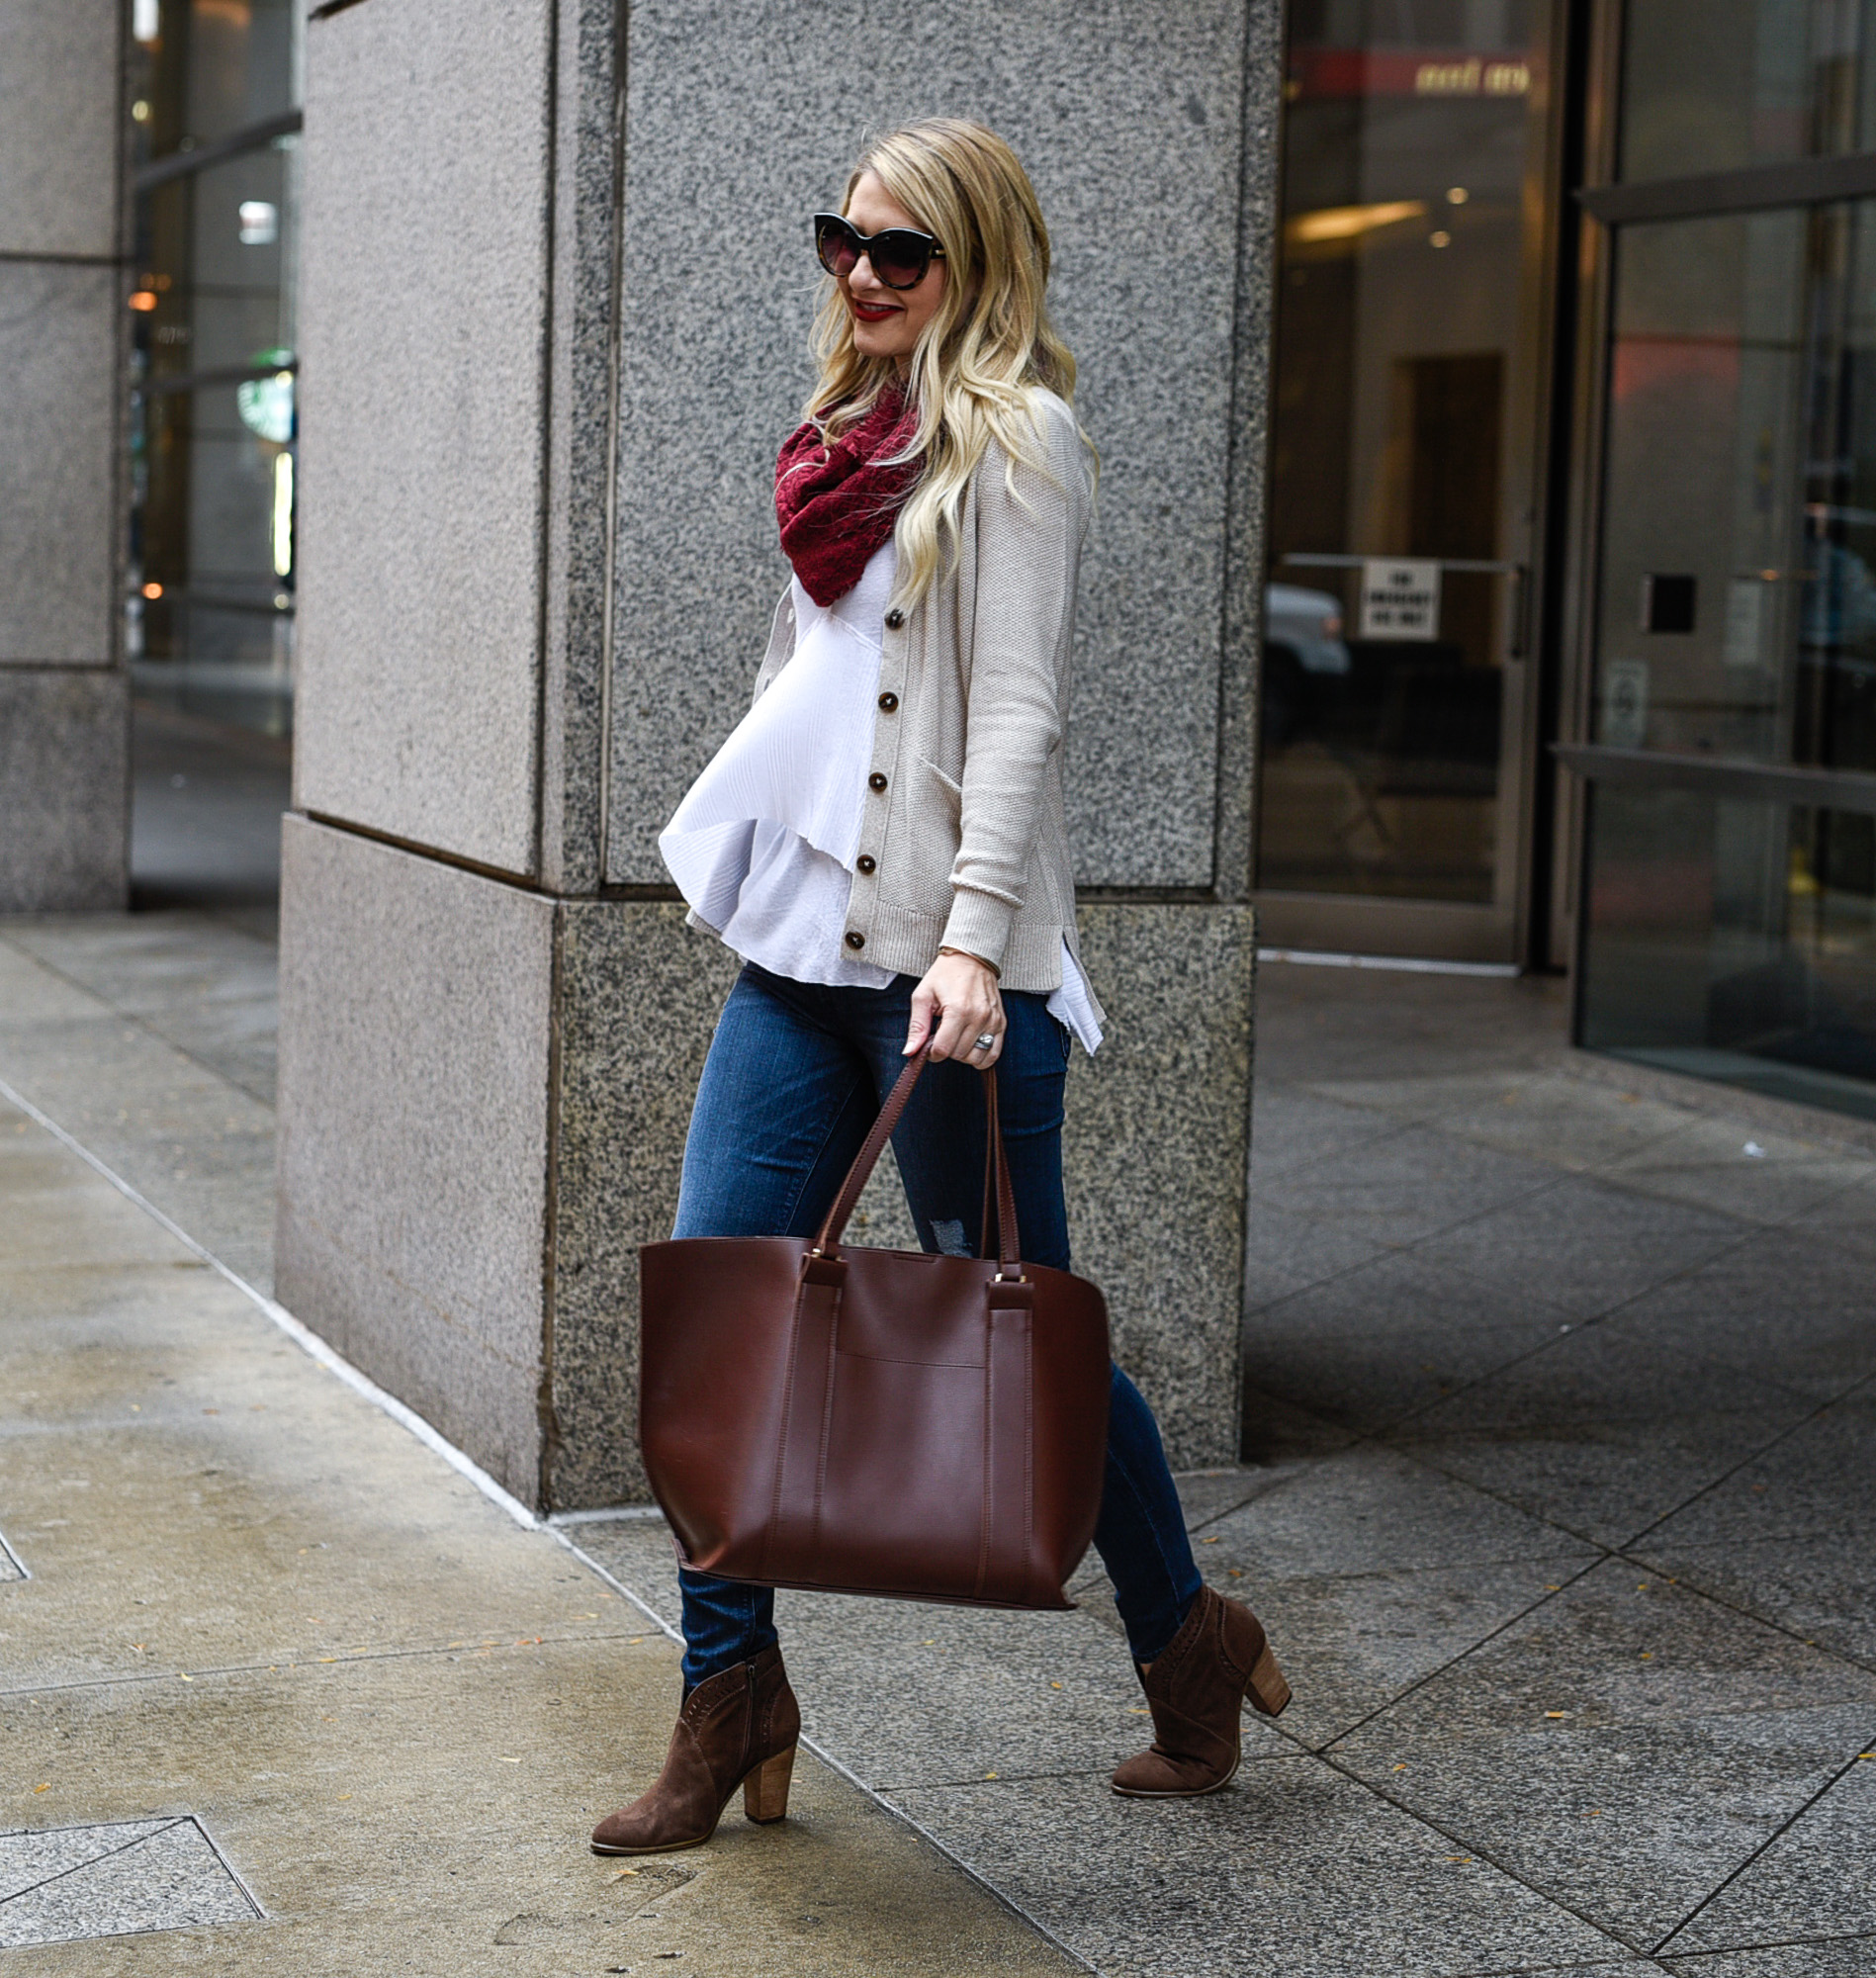 Jenna Colgrove wearing a Free People white t shirt, an infinity scarf, and Vince Camuto booties. 